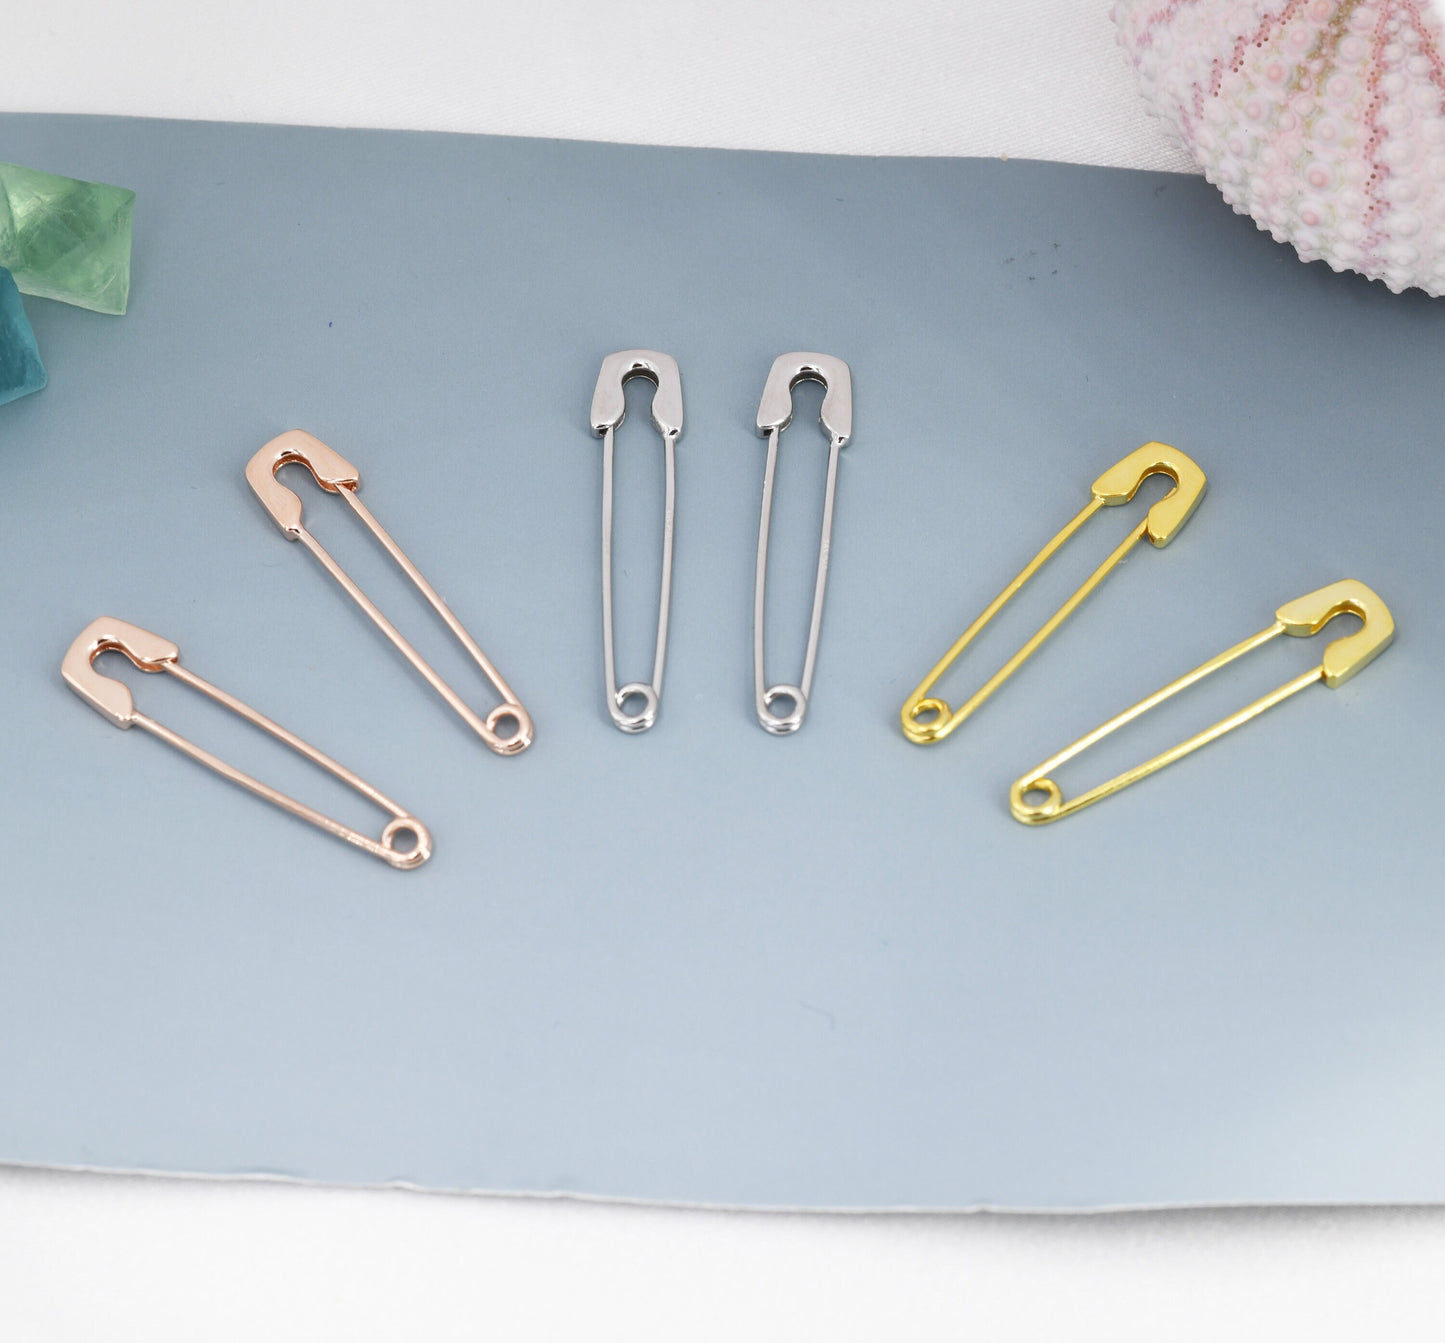 Safety Pin Pull Through Drop Earrings in Sterling Silver, Silve, Gold, Rose Gold or Black, Fun Quirky Punk Rock Jewellery